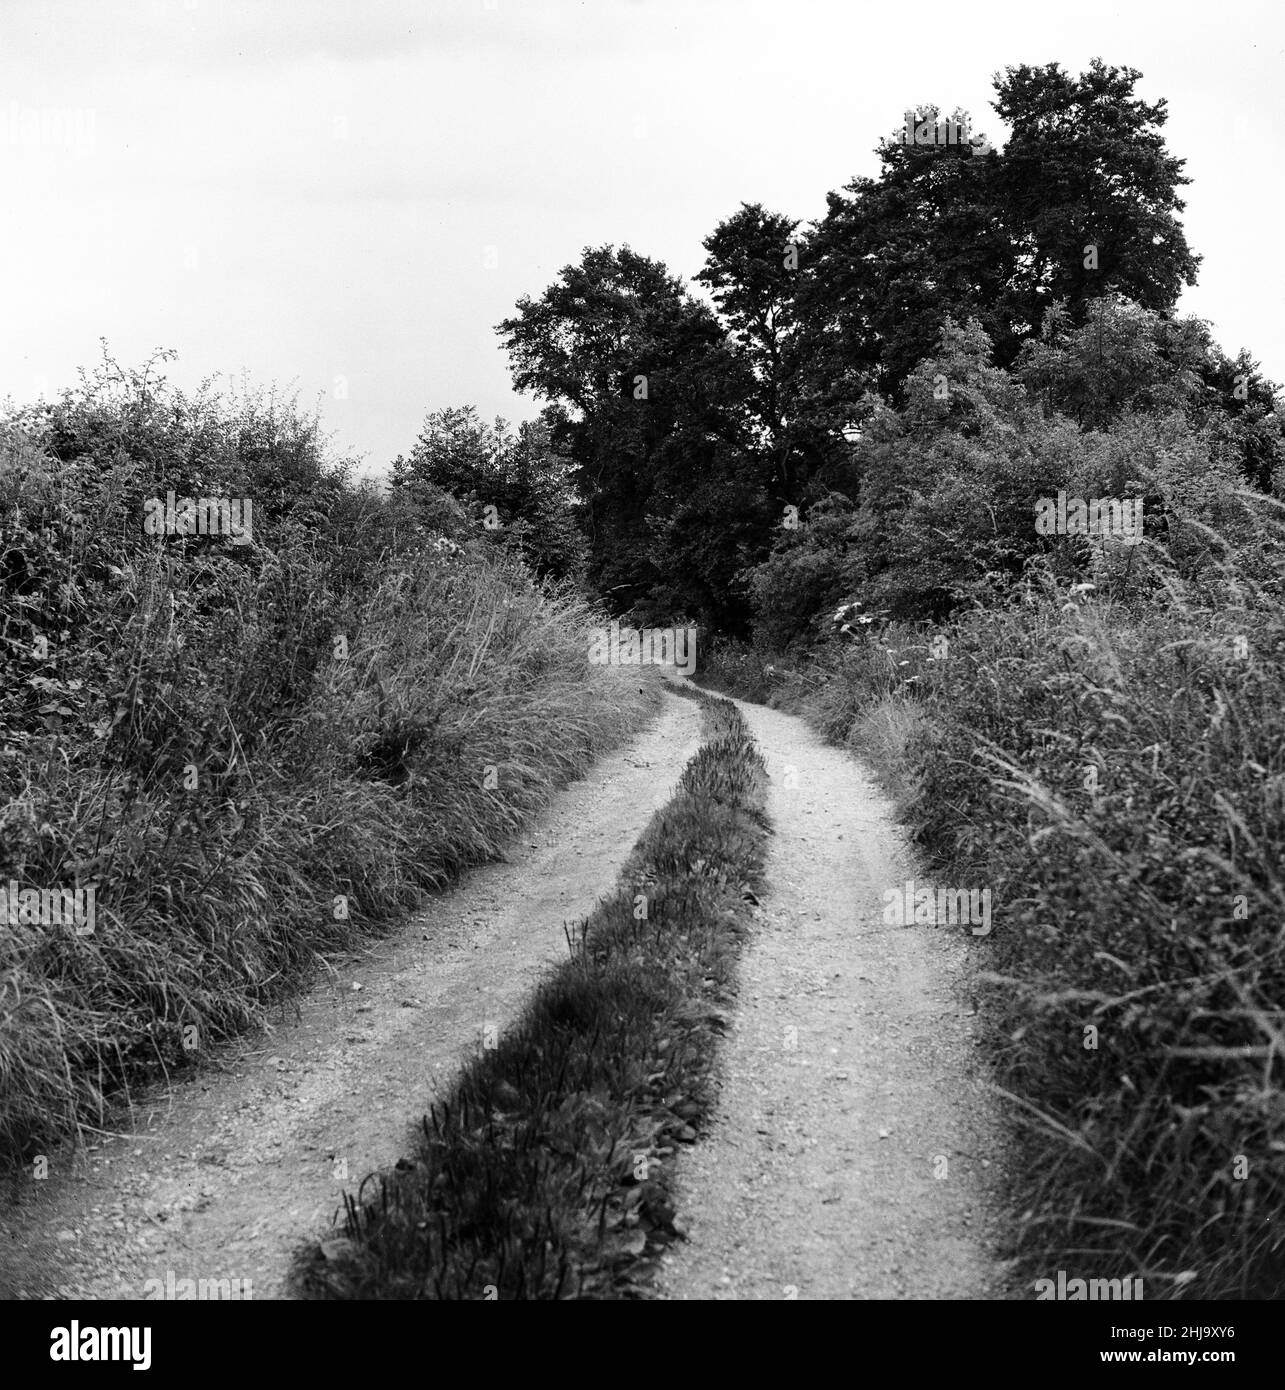 Leatherslade Farm, between Oakley and Brill in Buckinghamshire, hideout used by gang, 27 miles from the crime scene, Tuesday 13th August 1963. Our Picture Shows ... country lane leading up to remote farmhouse used as hideaway by gang in immediate aftermath of robbery.   The 1963 Great Train Robbery was the robbery of 2.6 million pounds from a Royal Mail train heading from Glasgow to London on the West Coast Main Line in the early hours of 8th August 1963, at Bridego Railway Bridge, Ledburn, near Mentmore in  Buckinghamshire, England. Stock Photo